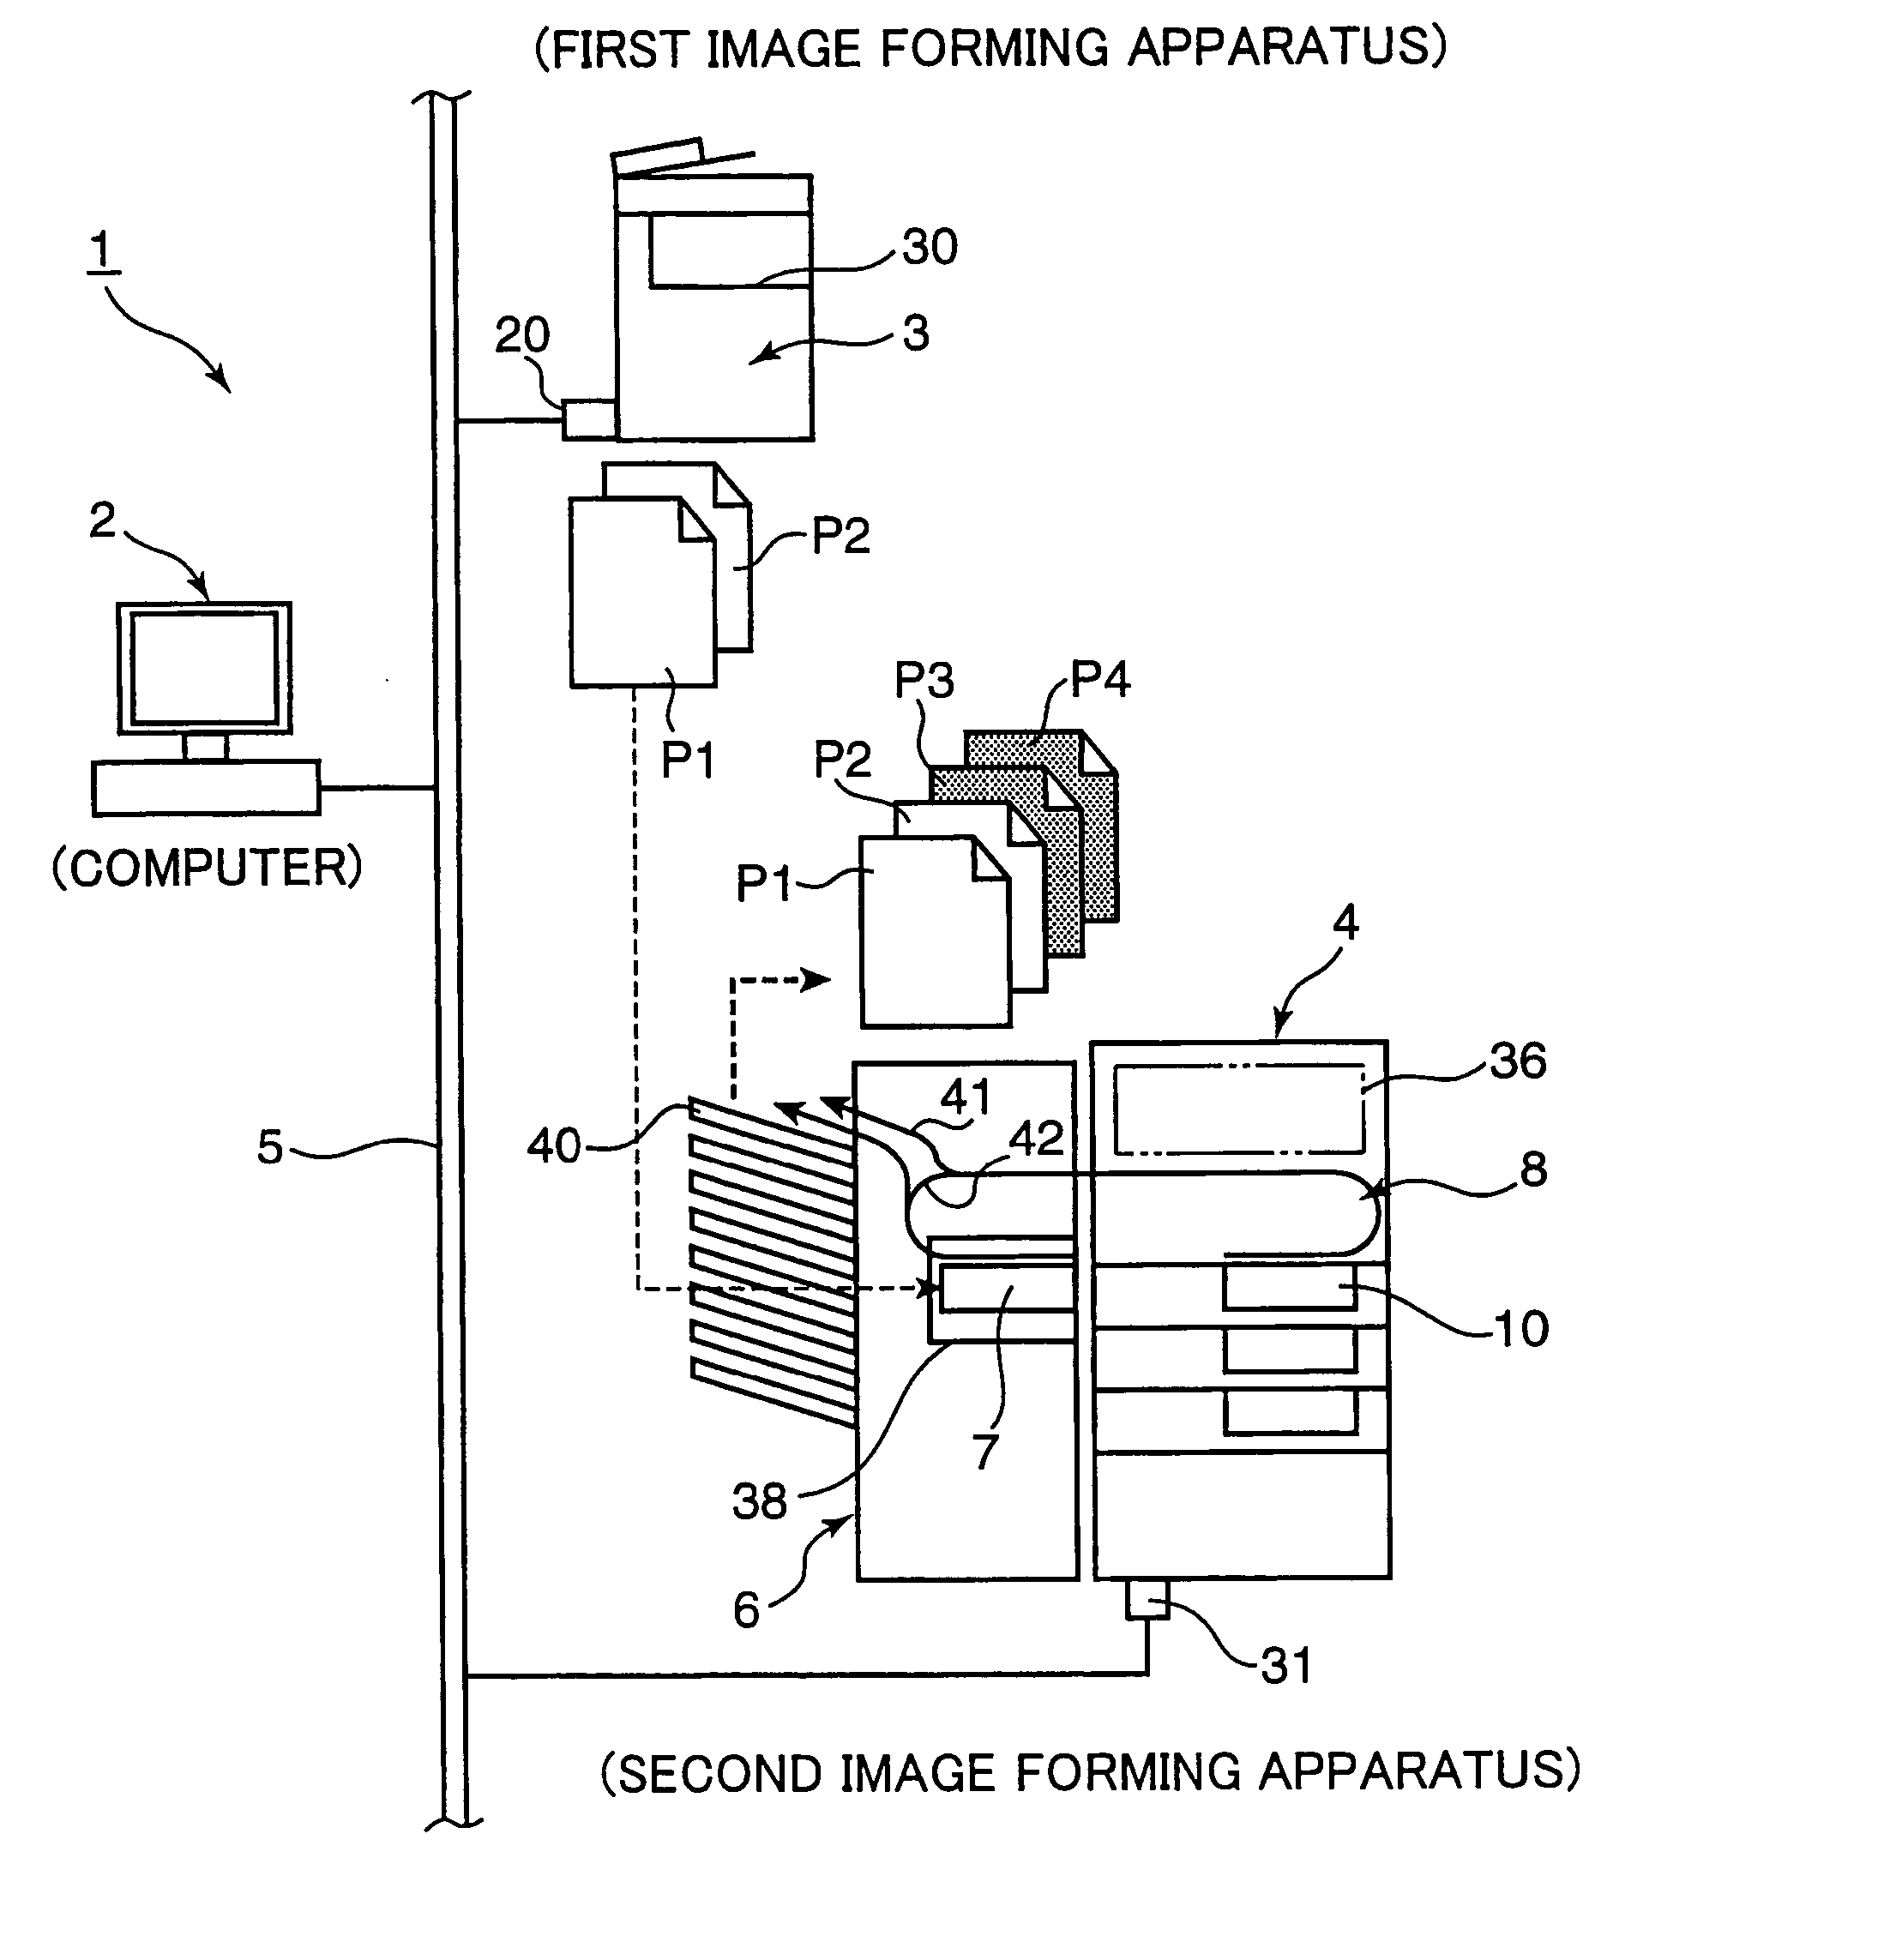 Image forming system, image forming apparatus, operation control method for image forming apparatus, and control program for image forming apparatus